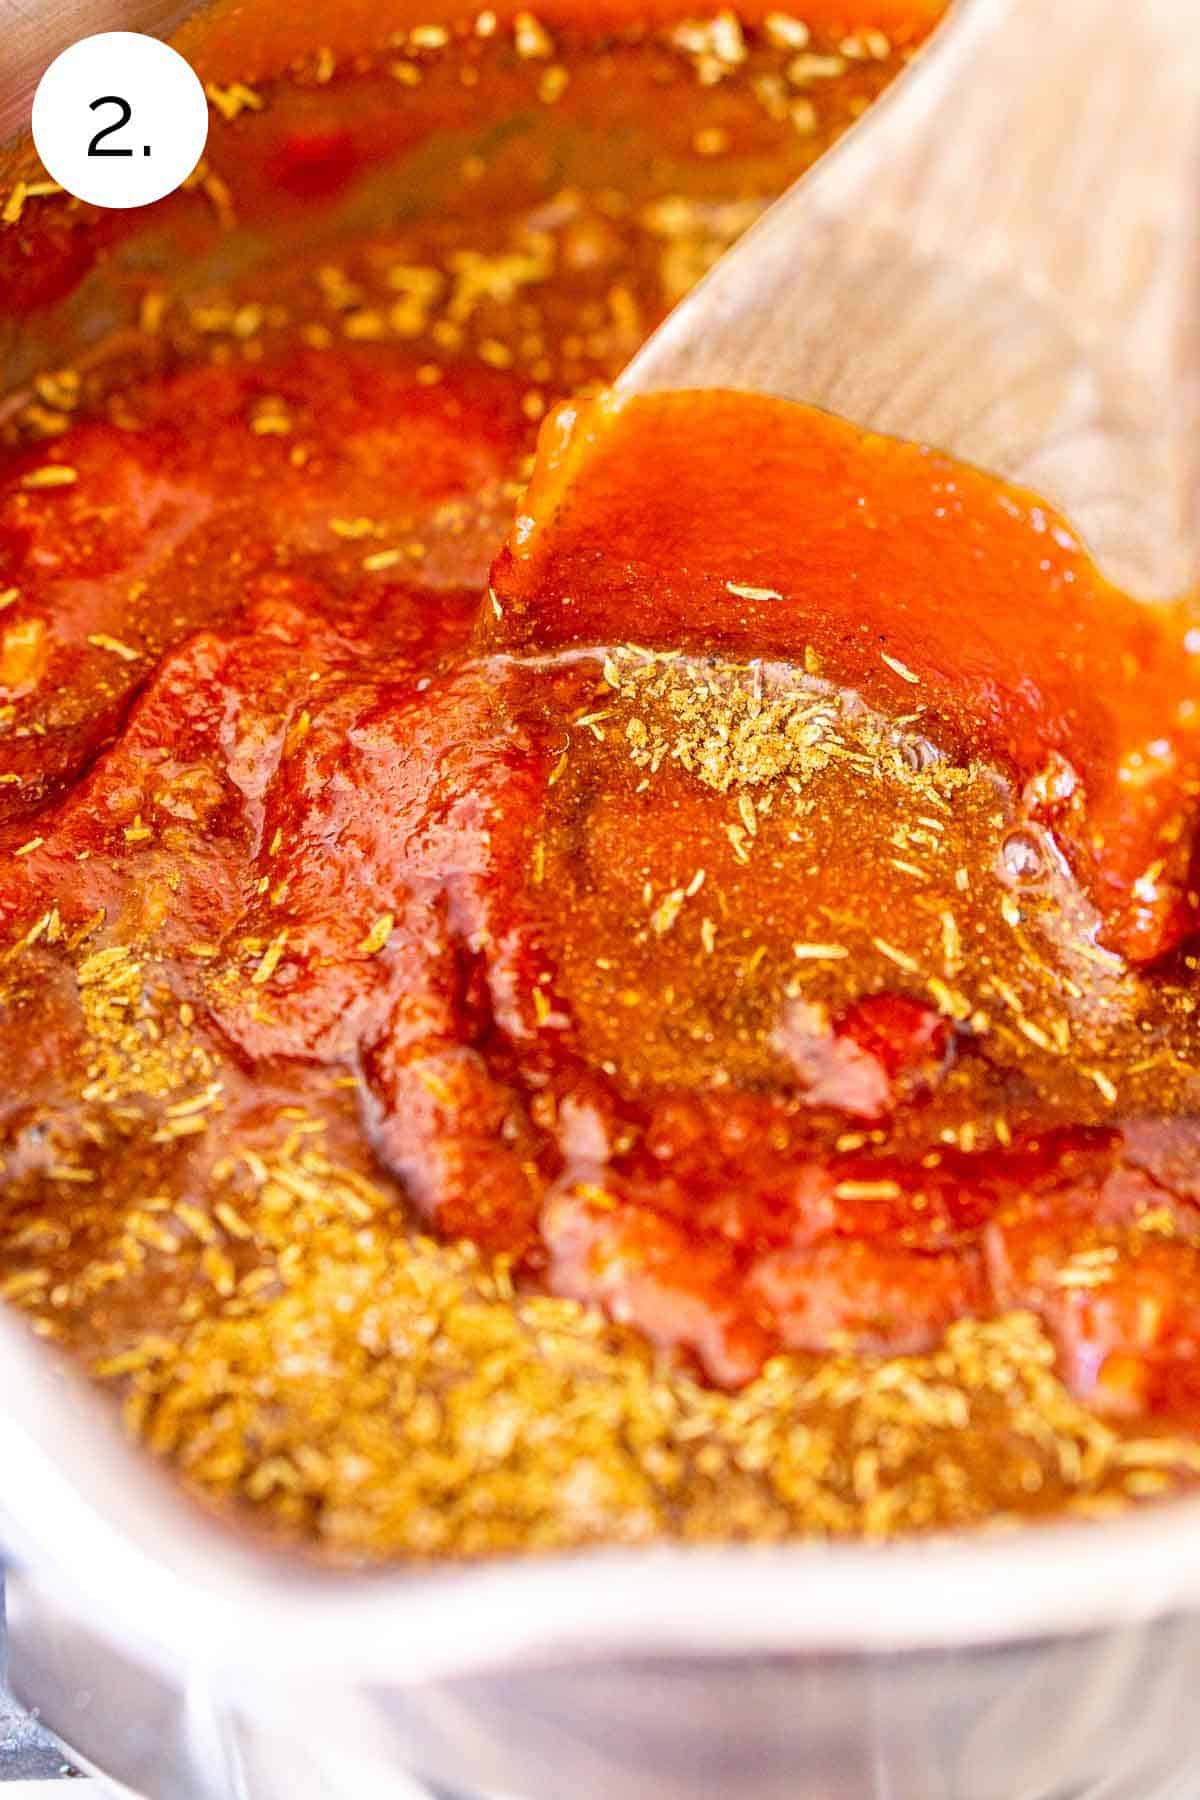 A brown wooden spoon stirring the spice mixture into the tomato sauce in a small stainless steel saucepan on the stove.